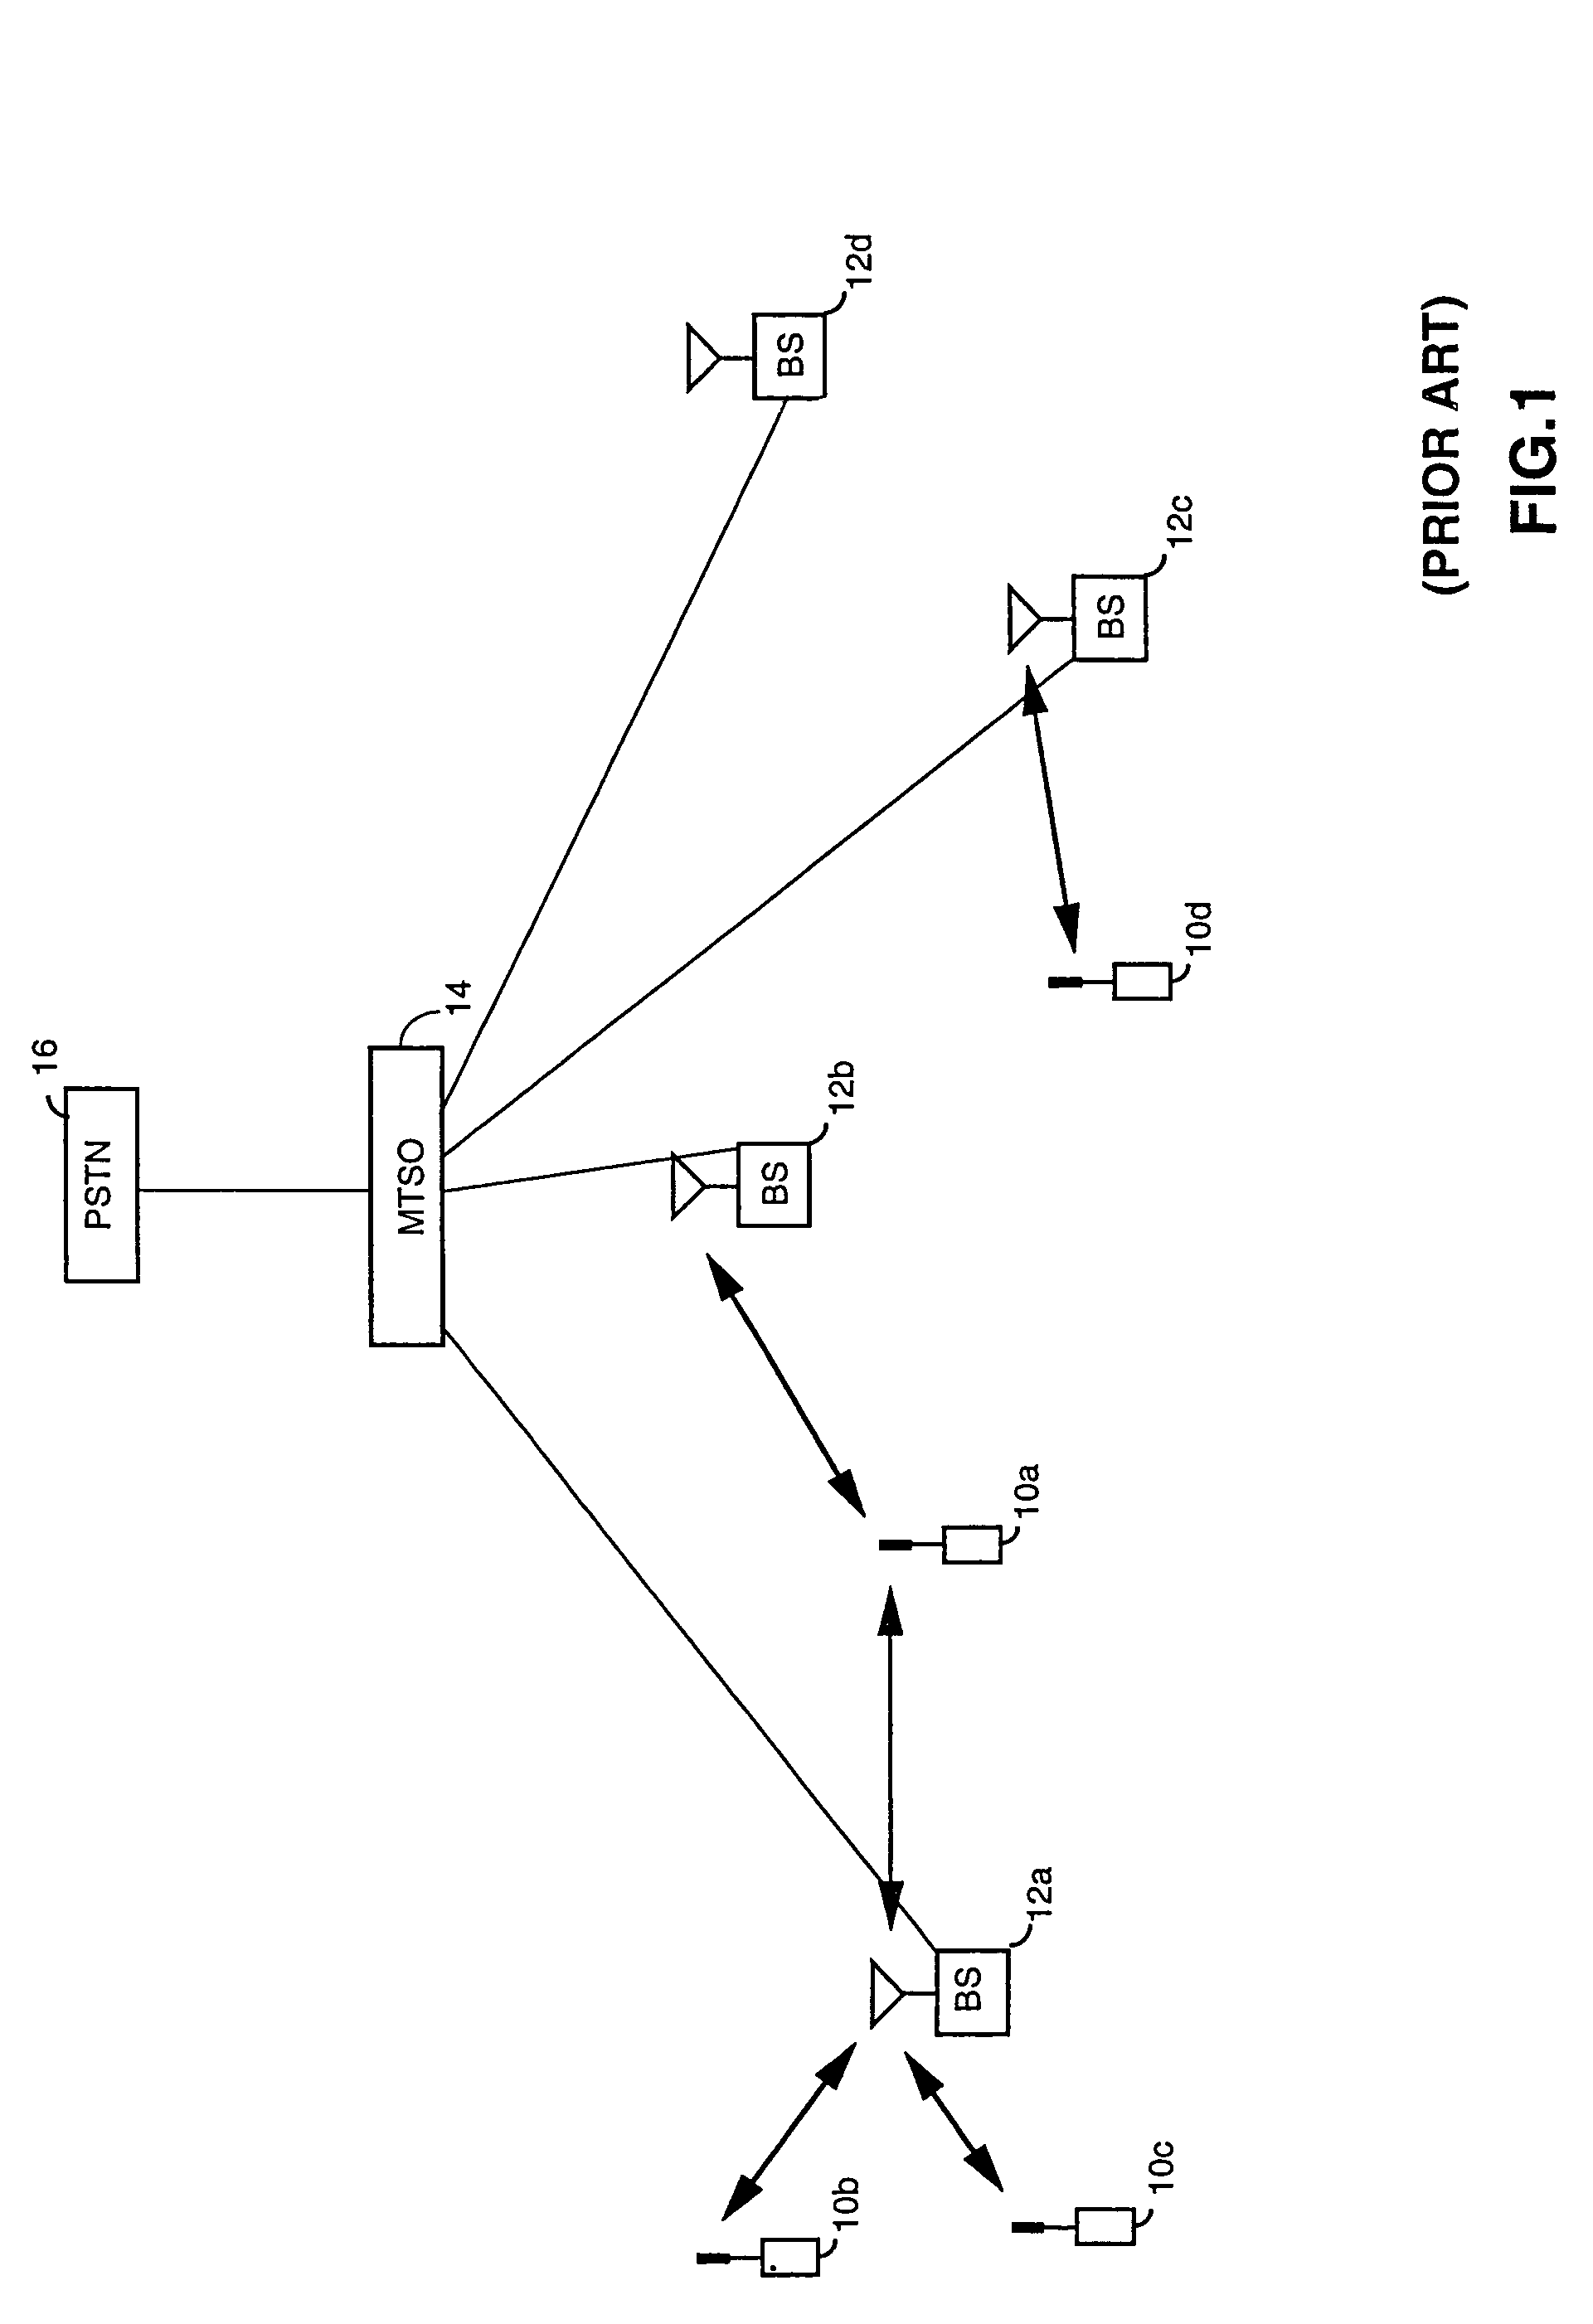 High data rate CDMA wireless communication system using variable sized channel codes